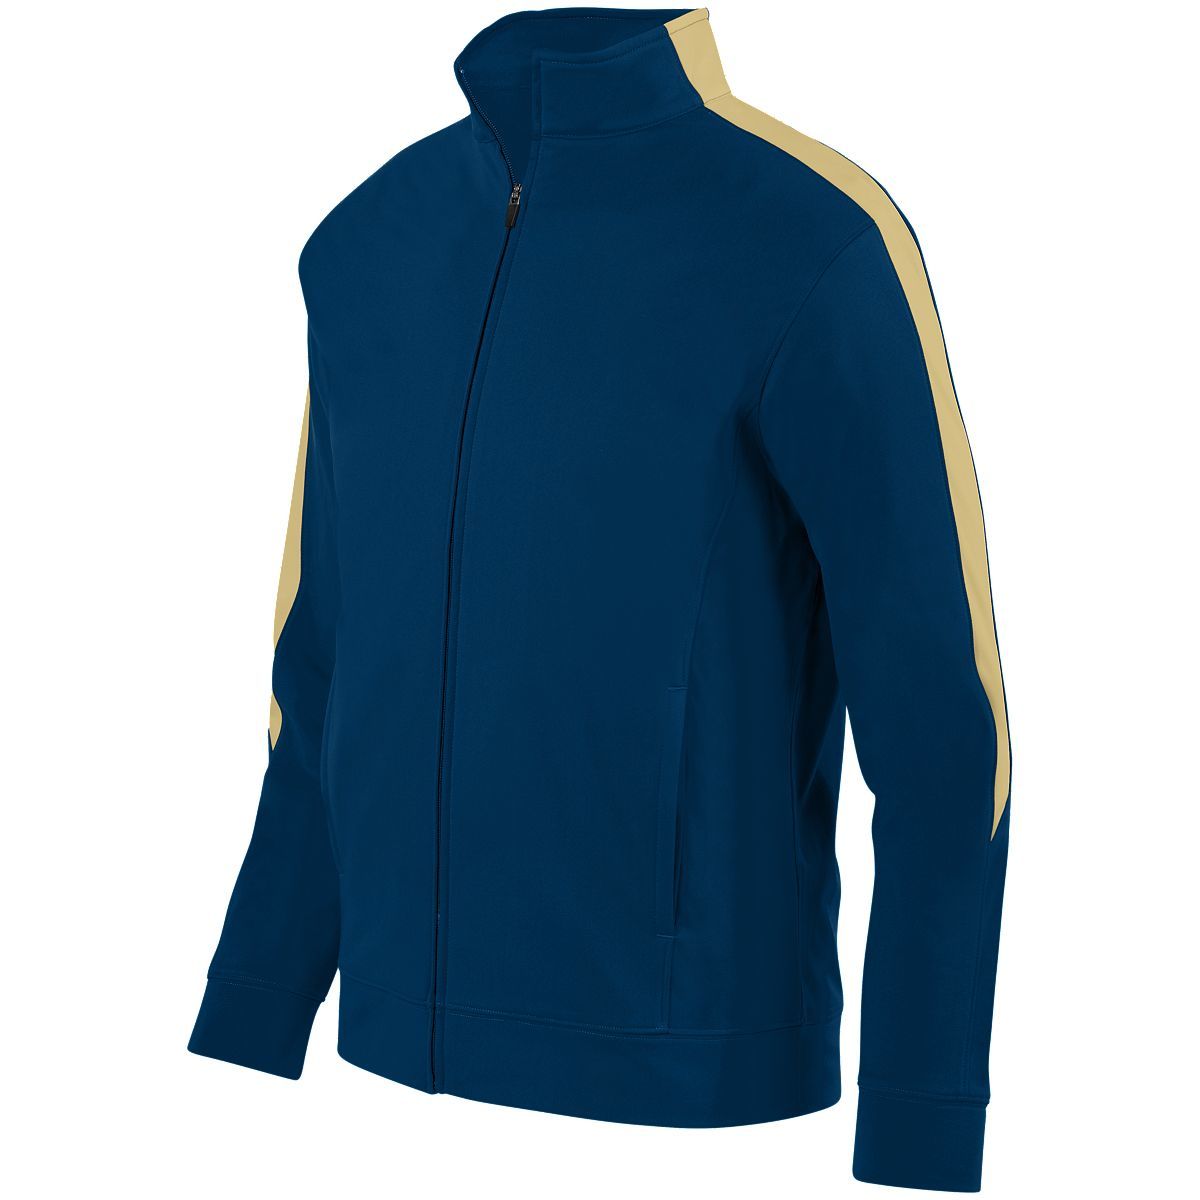 Augusta Sportswear Youth Medalist Jacket 2.0 in Navy/Vegas Gold  -Part of the Youth, Youth-Jacket, Augusta-Products, Outerwear product lines at KanaleyCreations.com